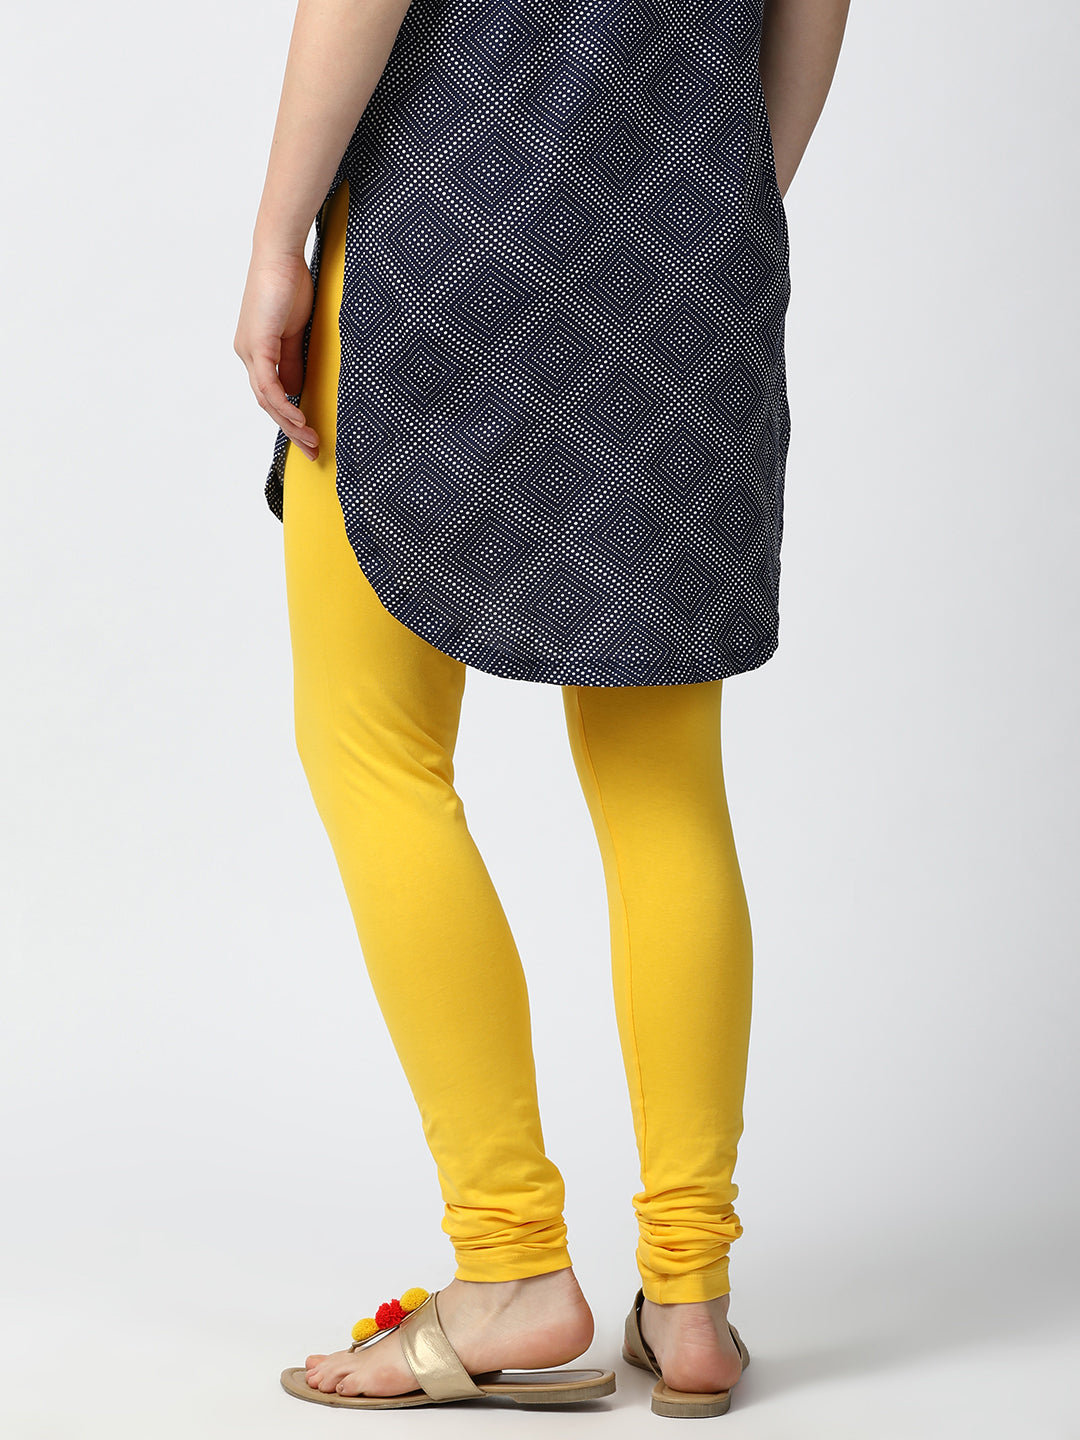 Buy Stylish Yellow Leggings Collection At Best Prices Online